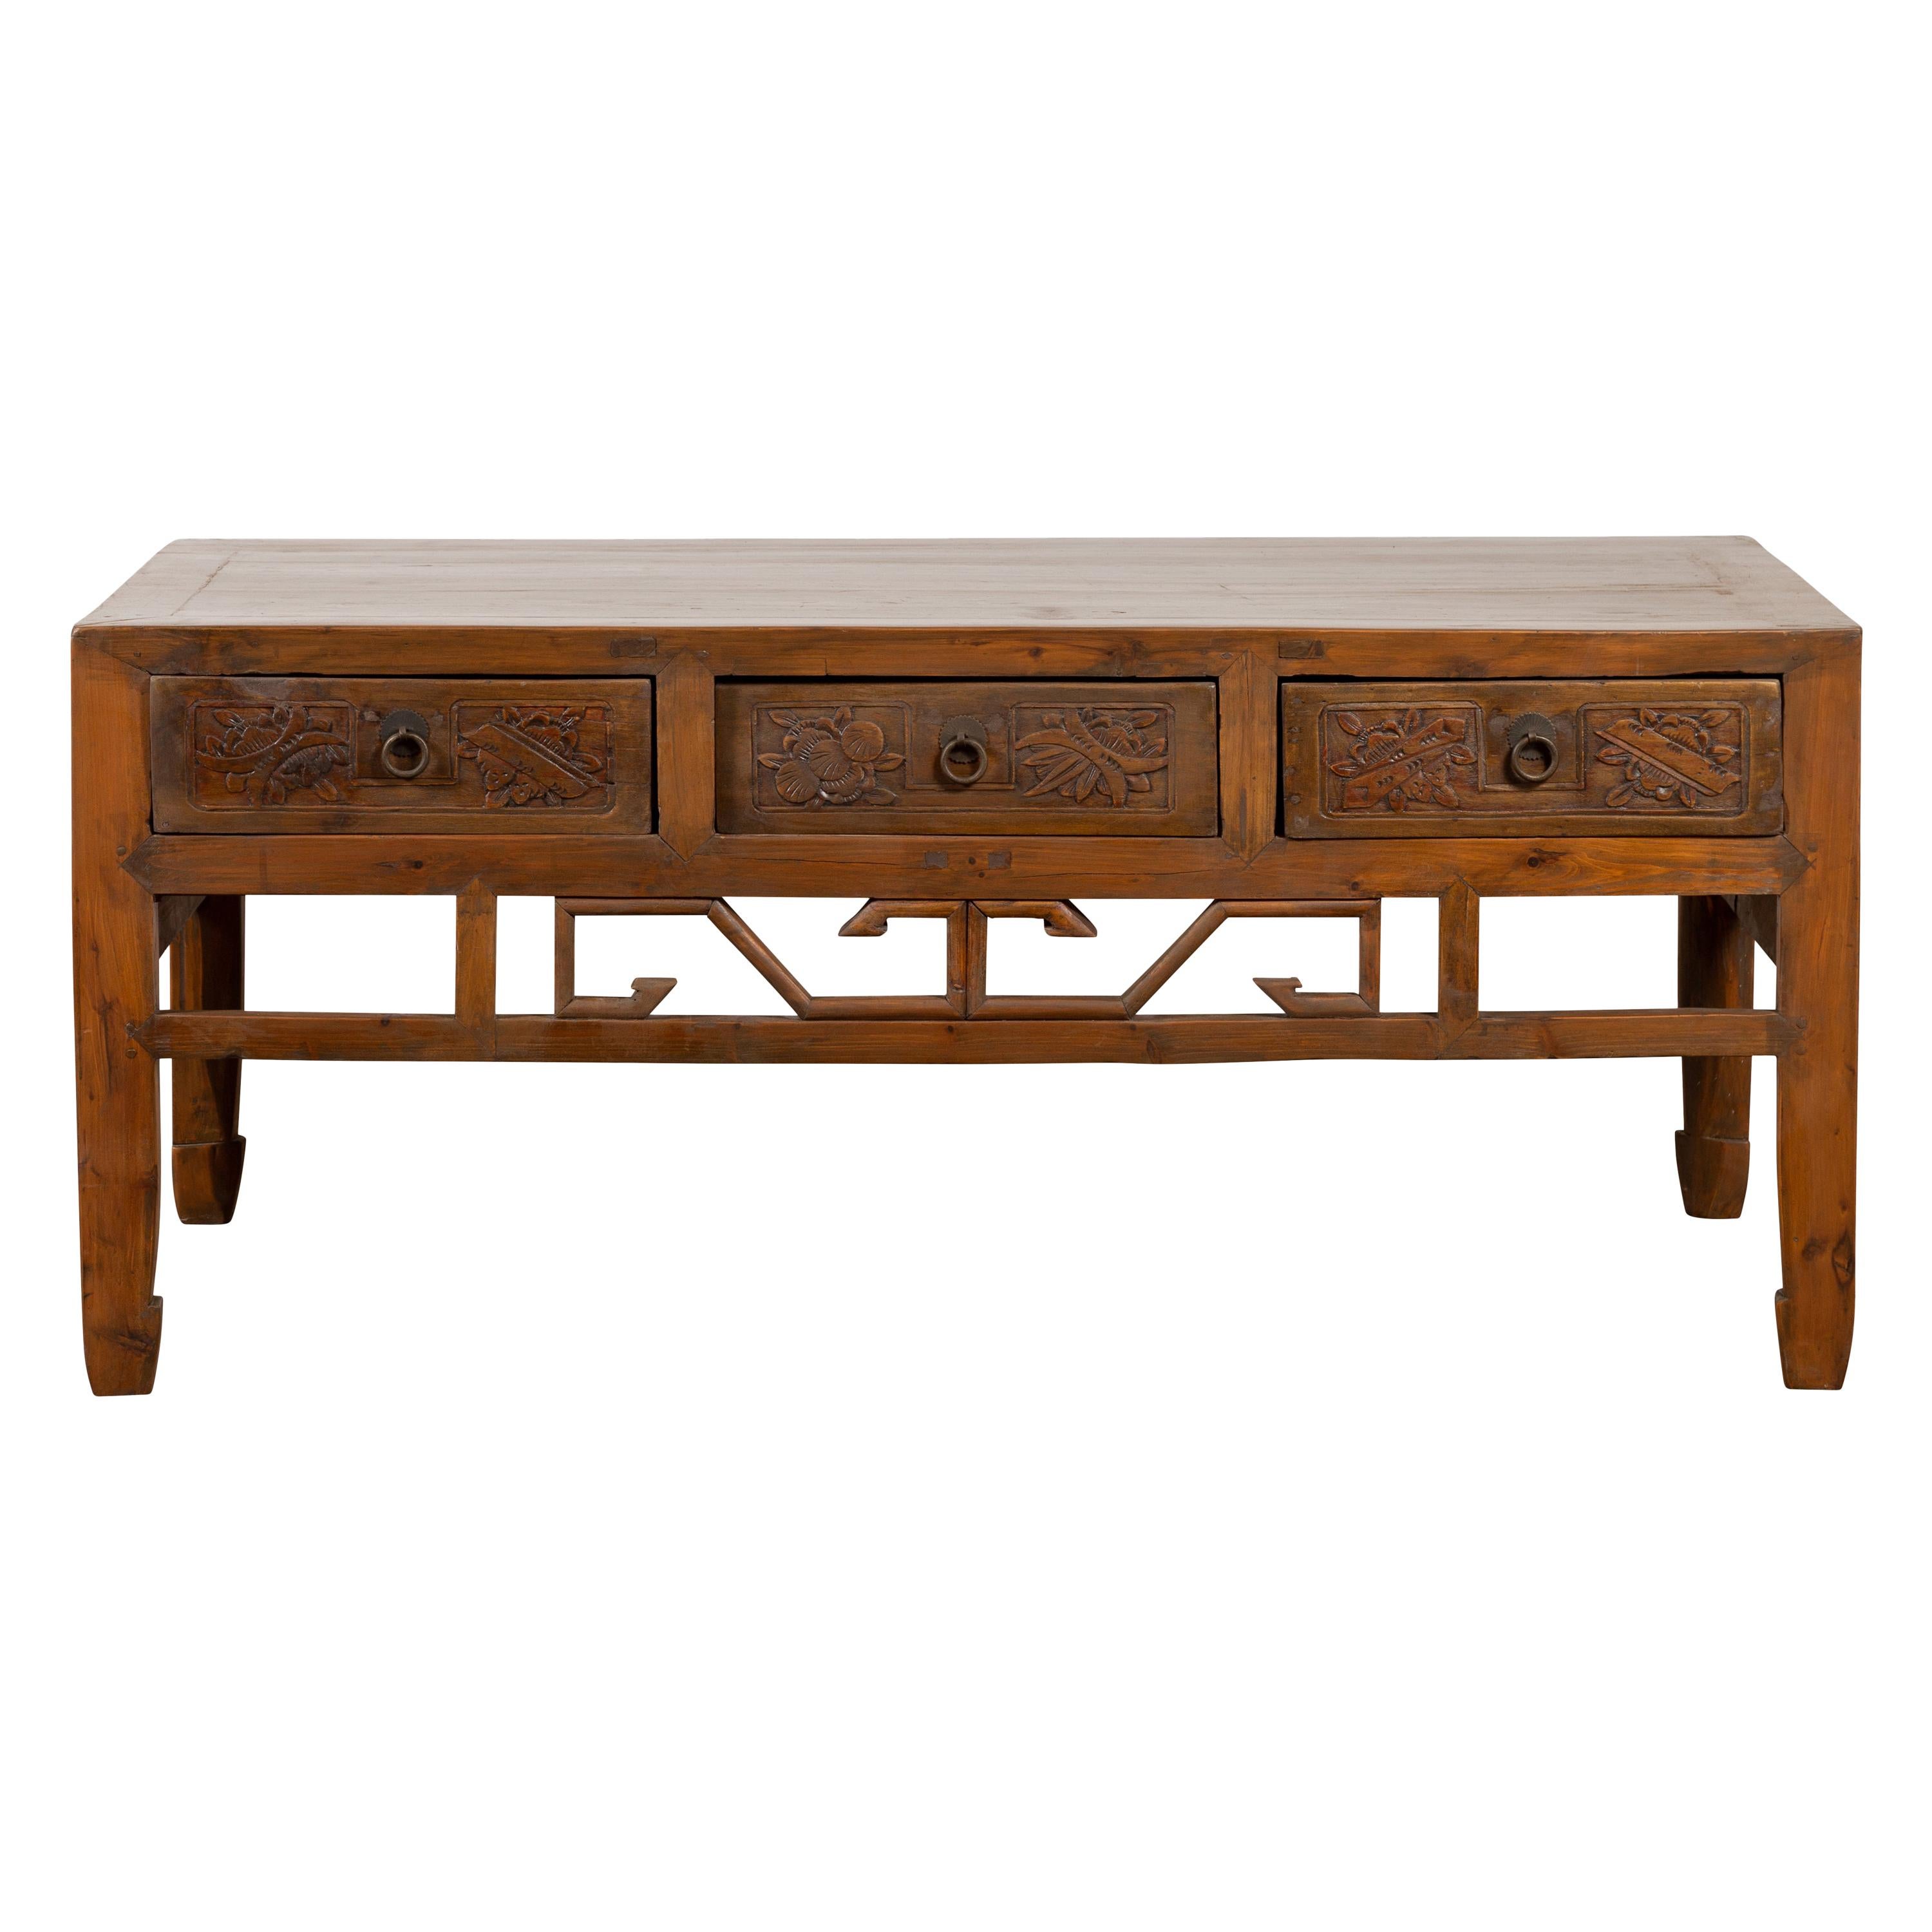 Chinese Vintage Coffee Table with Three Carved Drawers and Openwork Apron For Sale